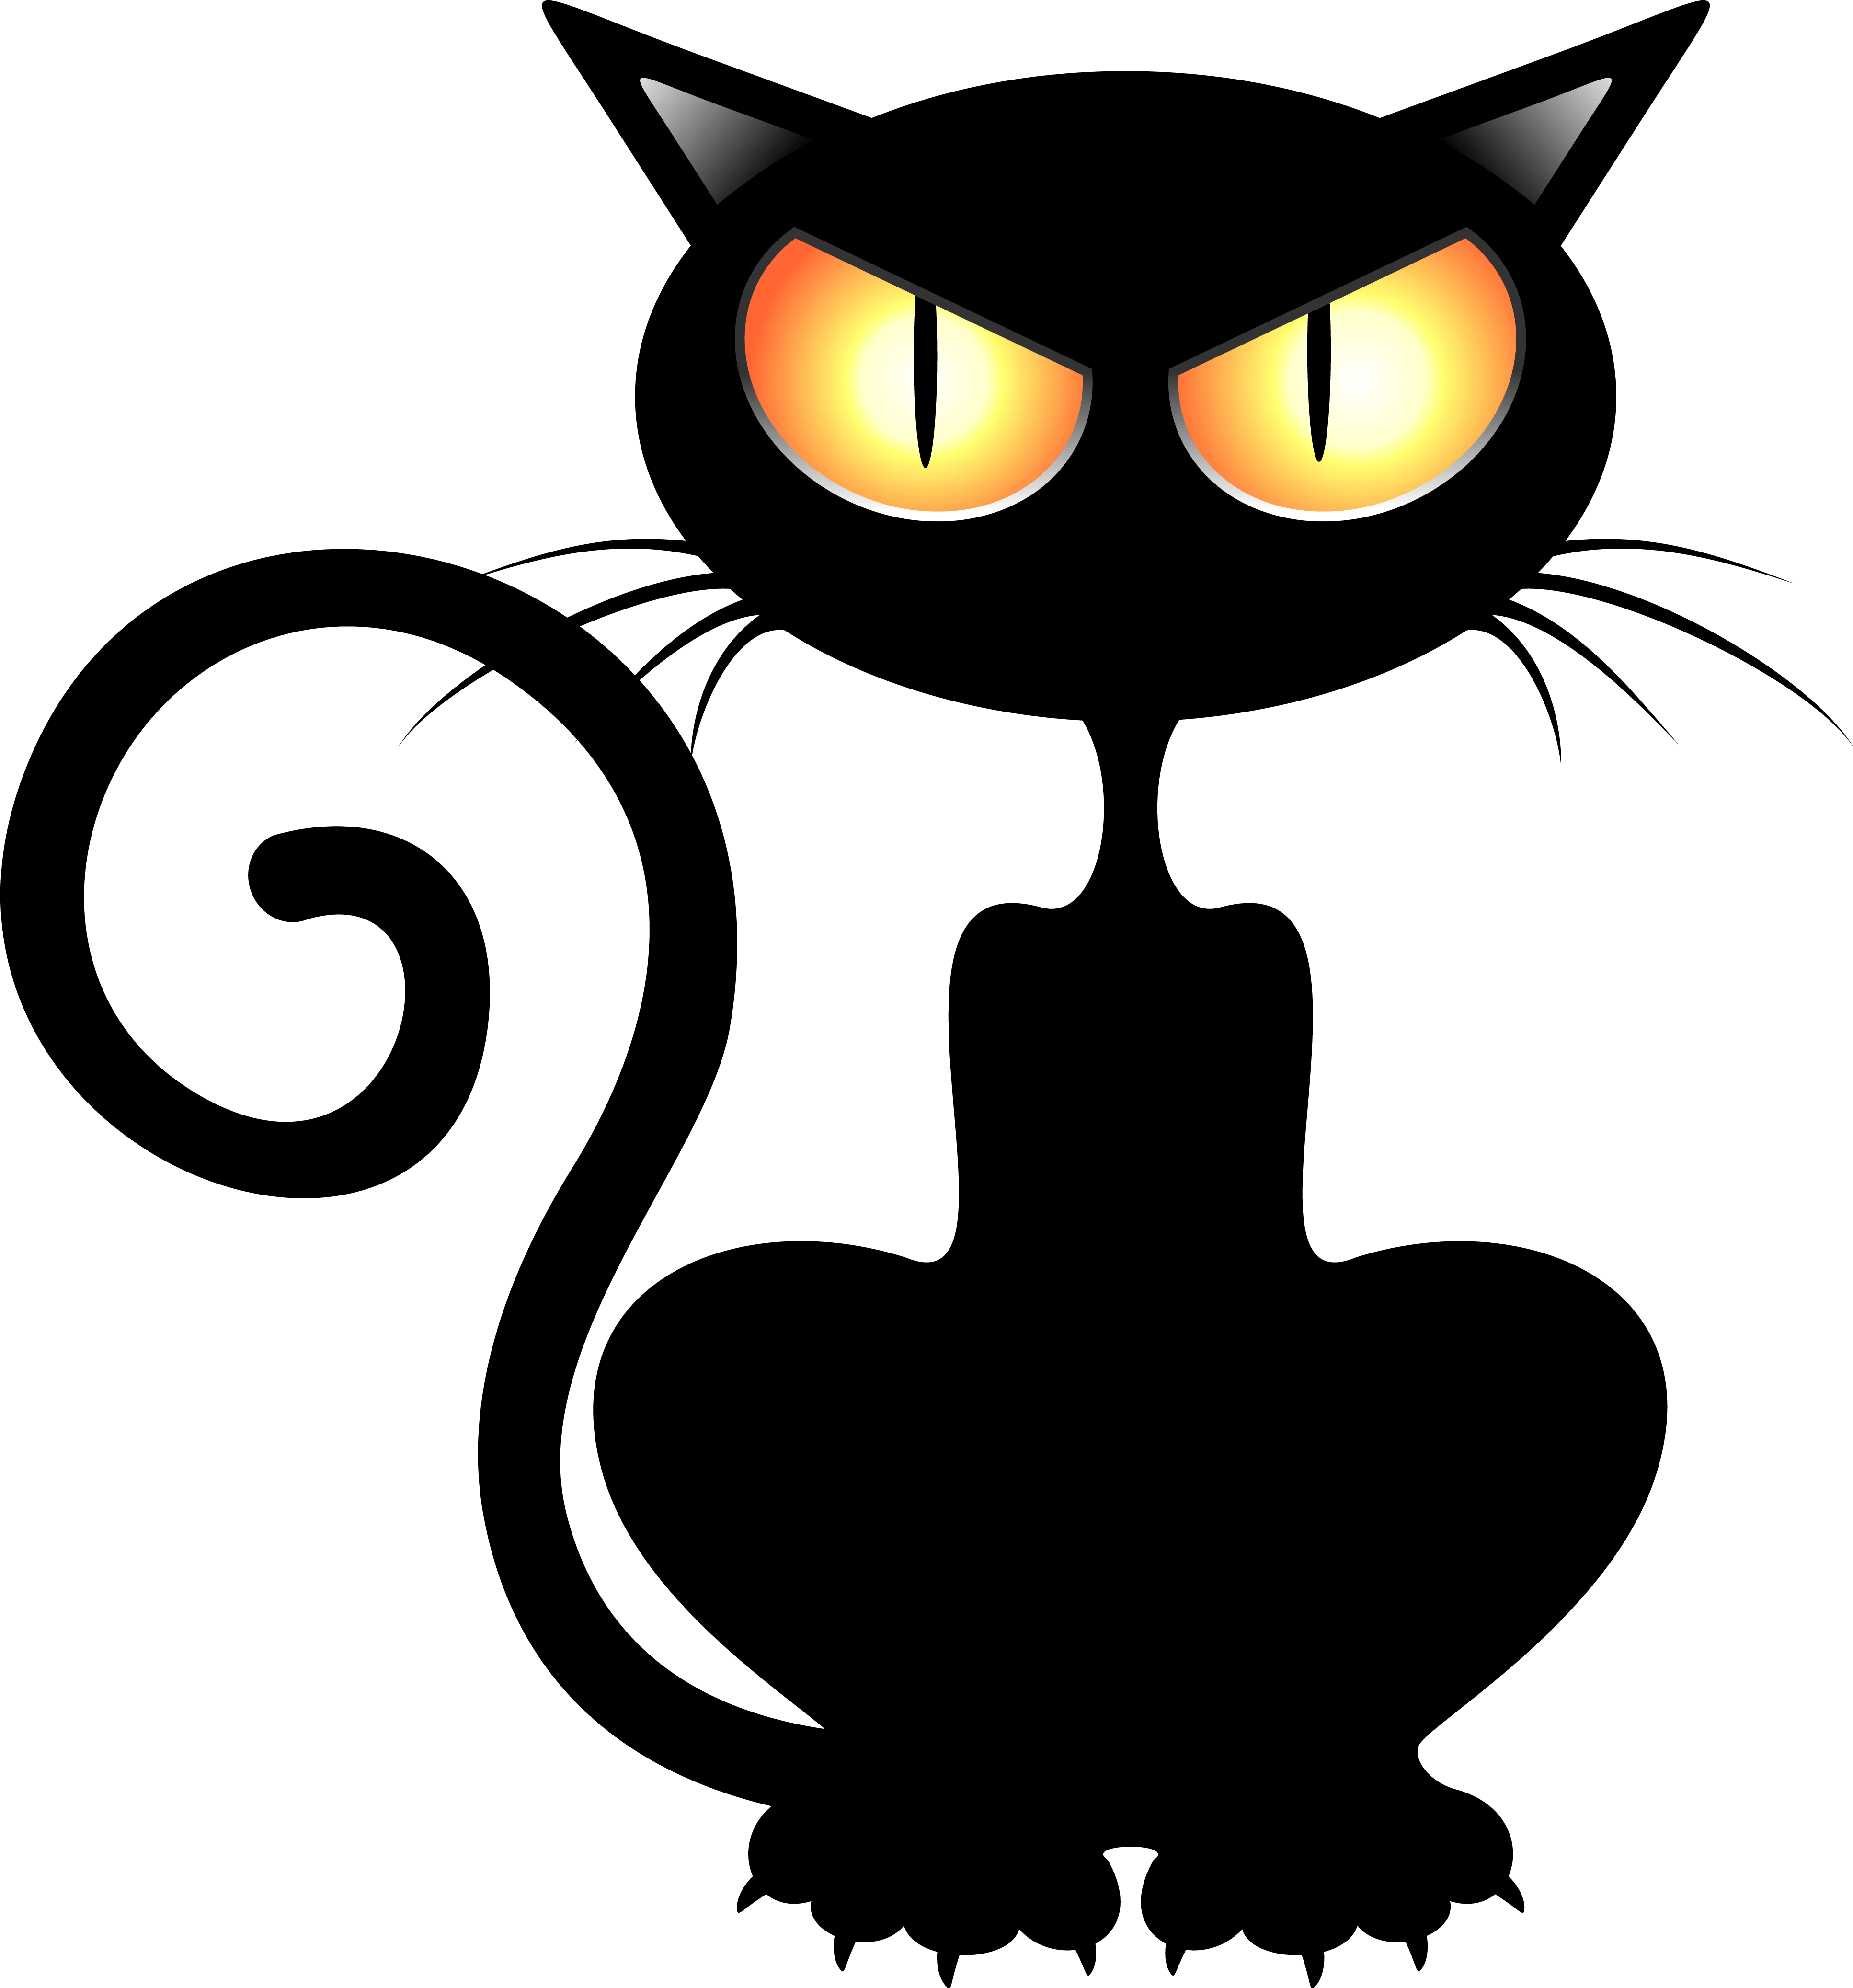 A Cat's Eyes With A Black Background